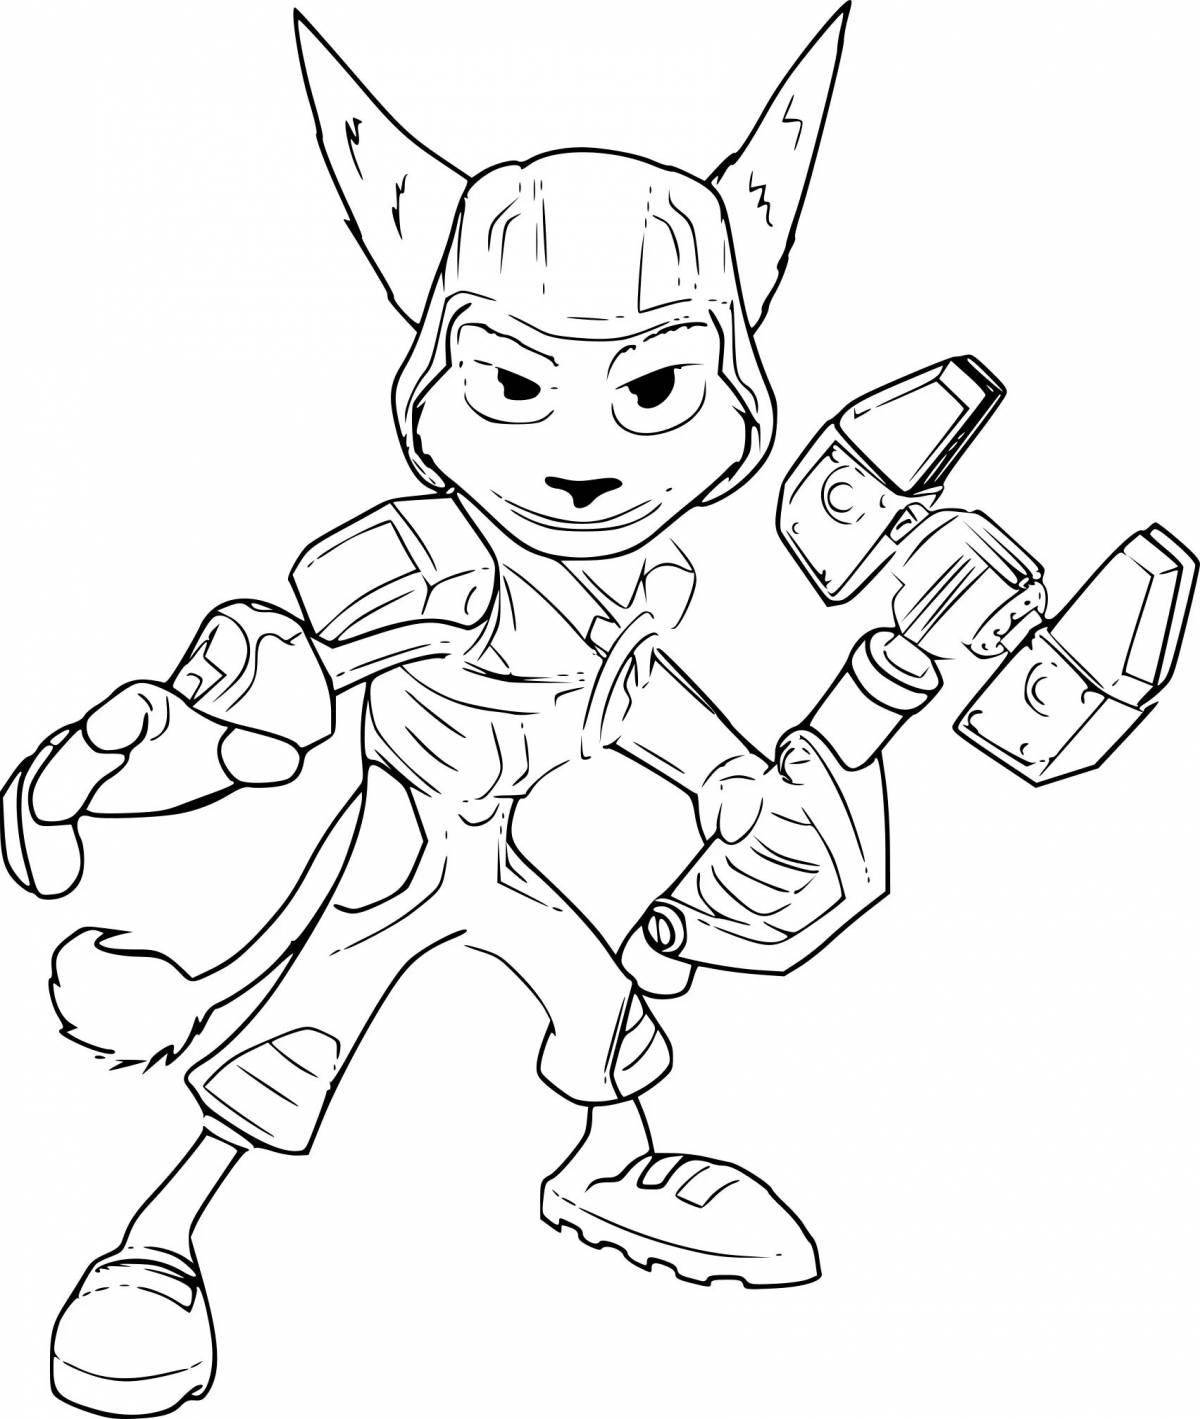 Colorful ratchet and clank coloring page